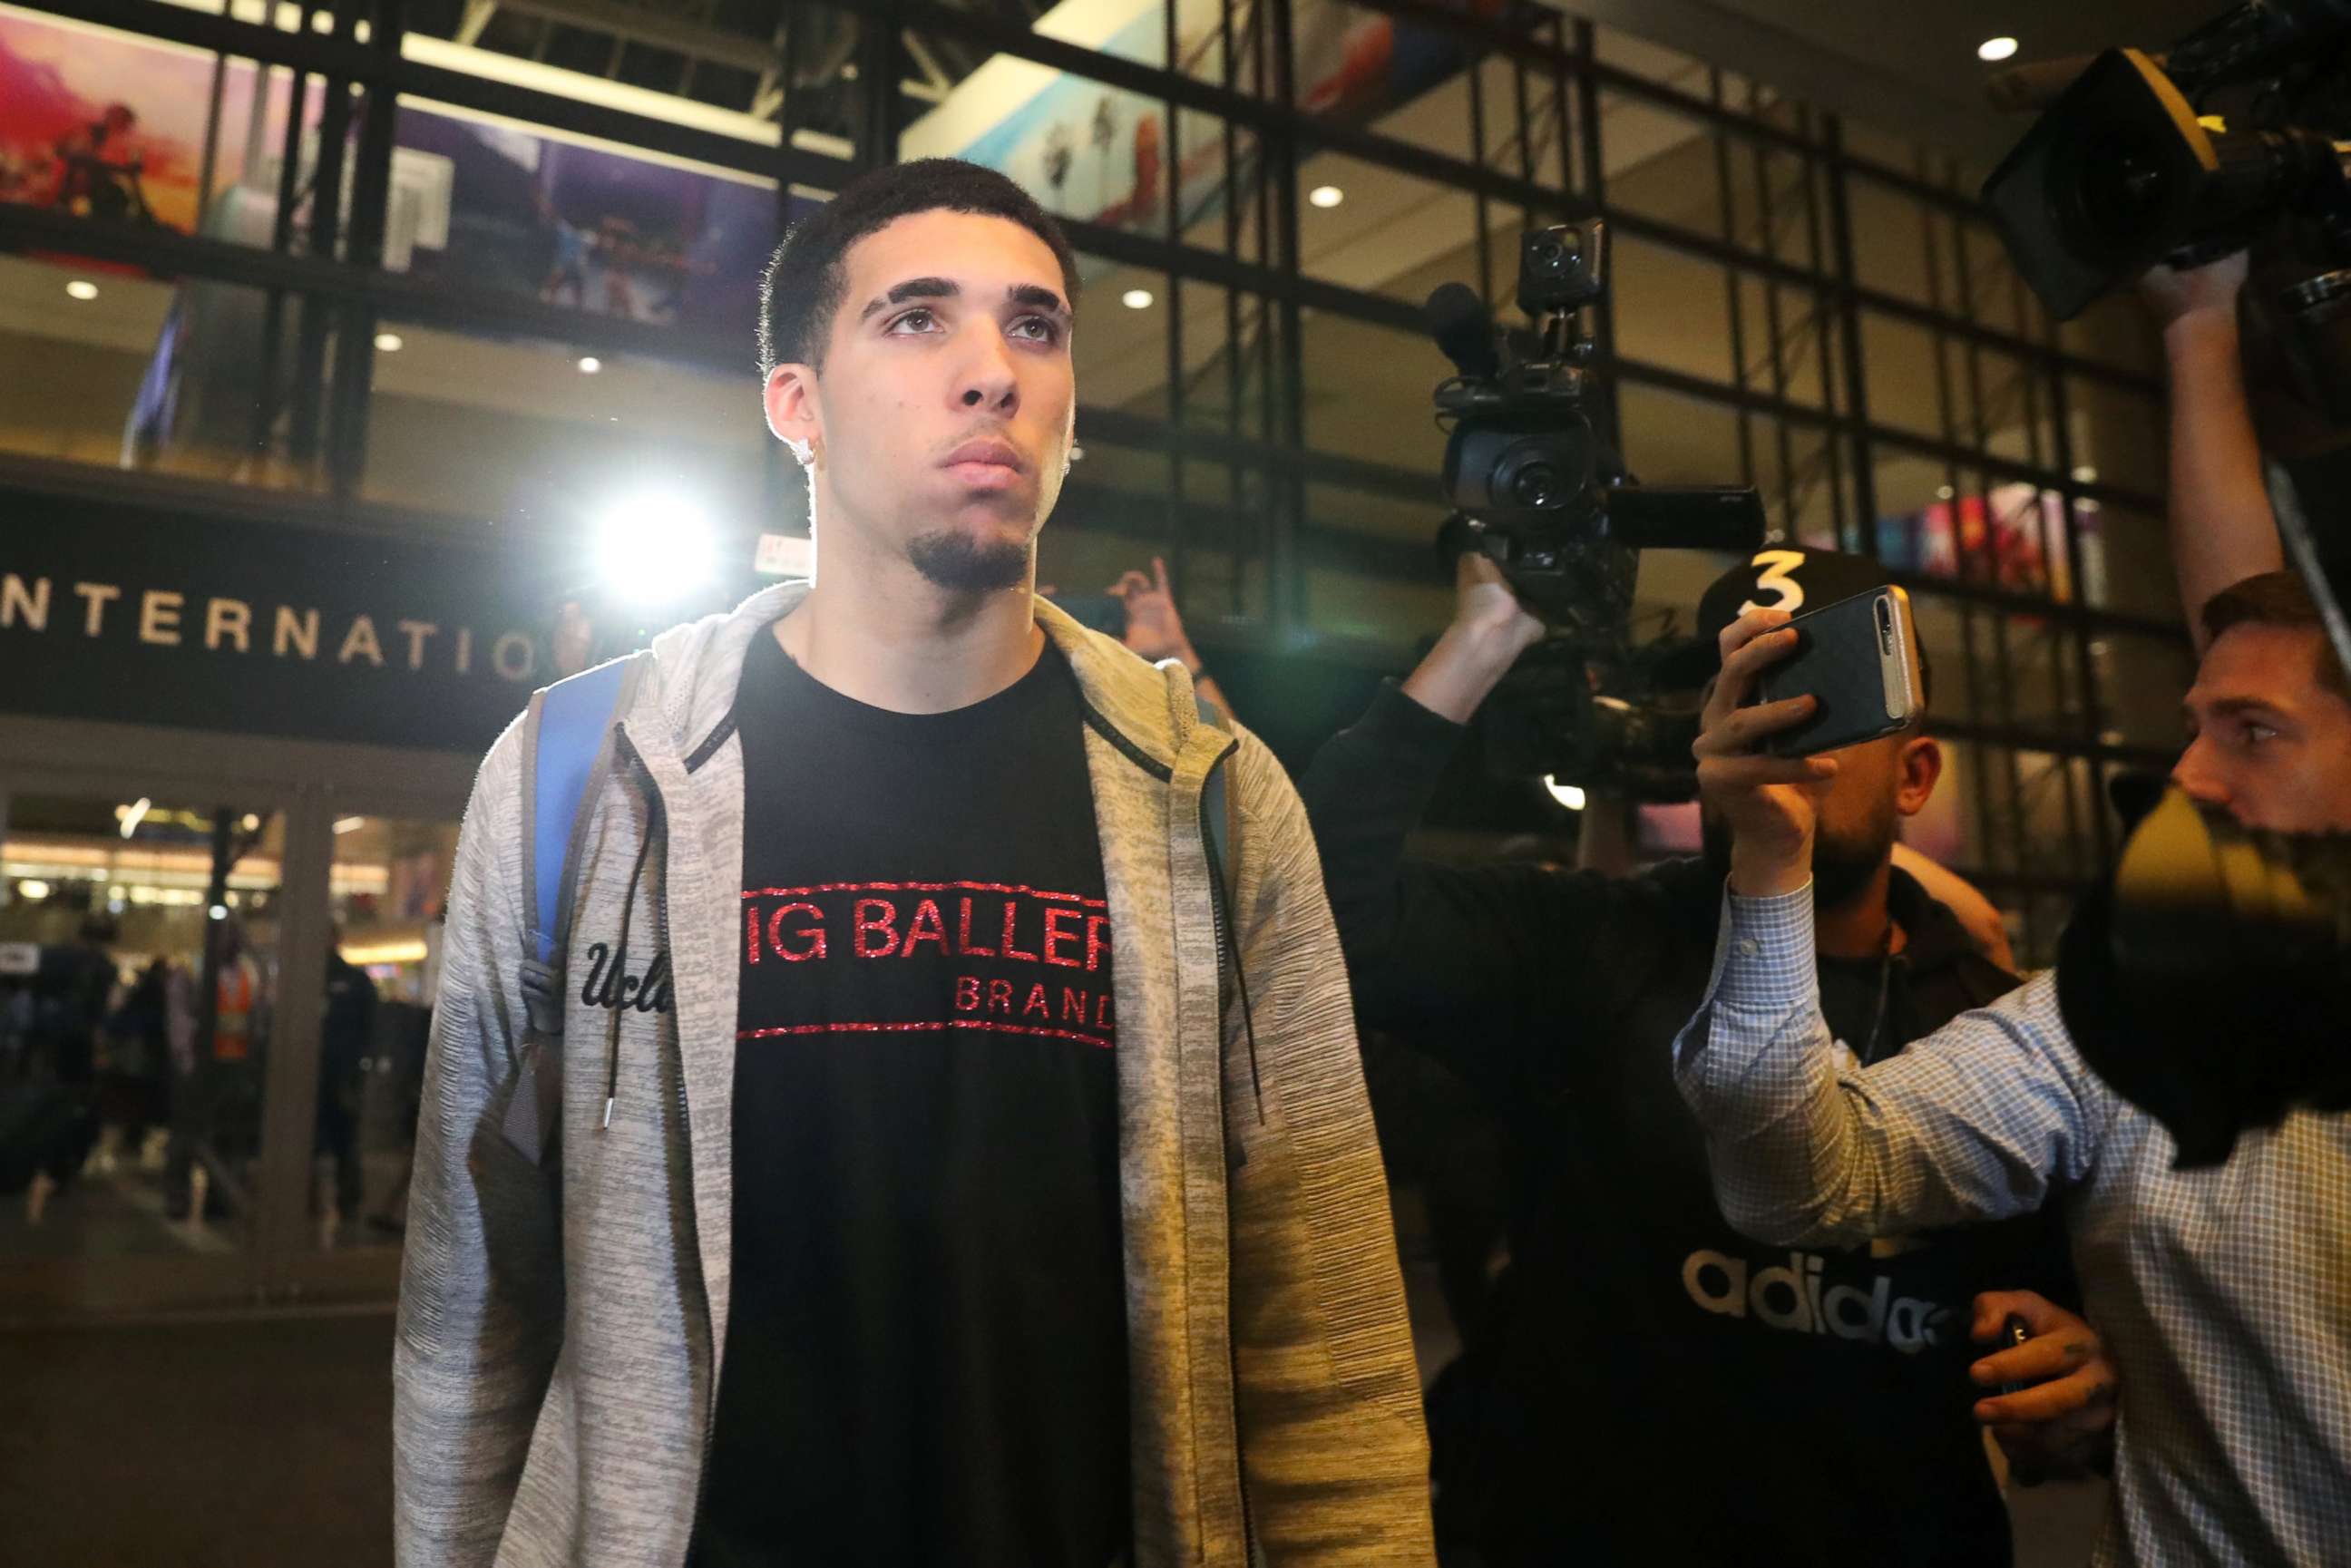 PHOTO: UCLA basketball player LiAngelo Ball arrives at LAX after flying back from China where he was detained on suspicion of shoplifting, in Los Angeles, Nov. 14, 2017.